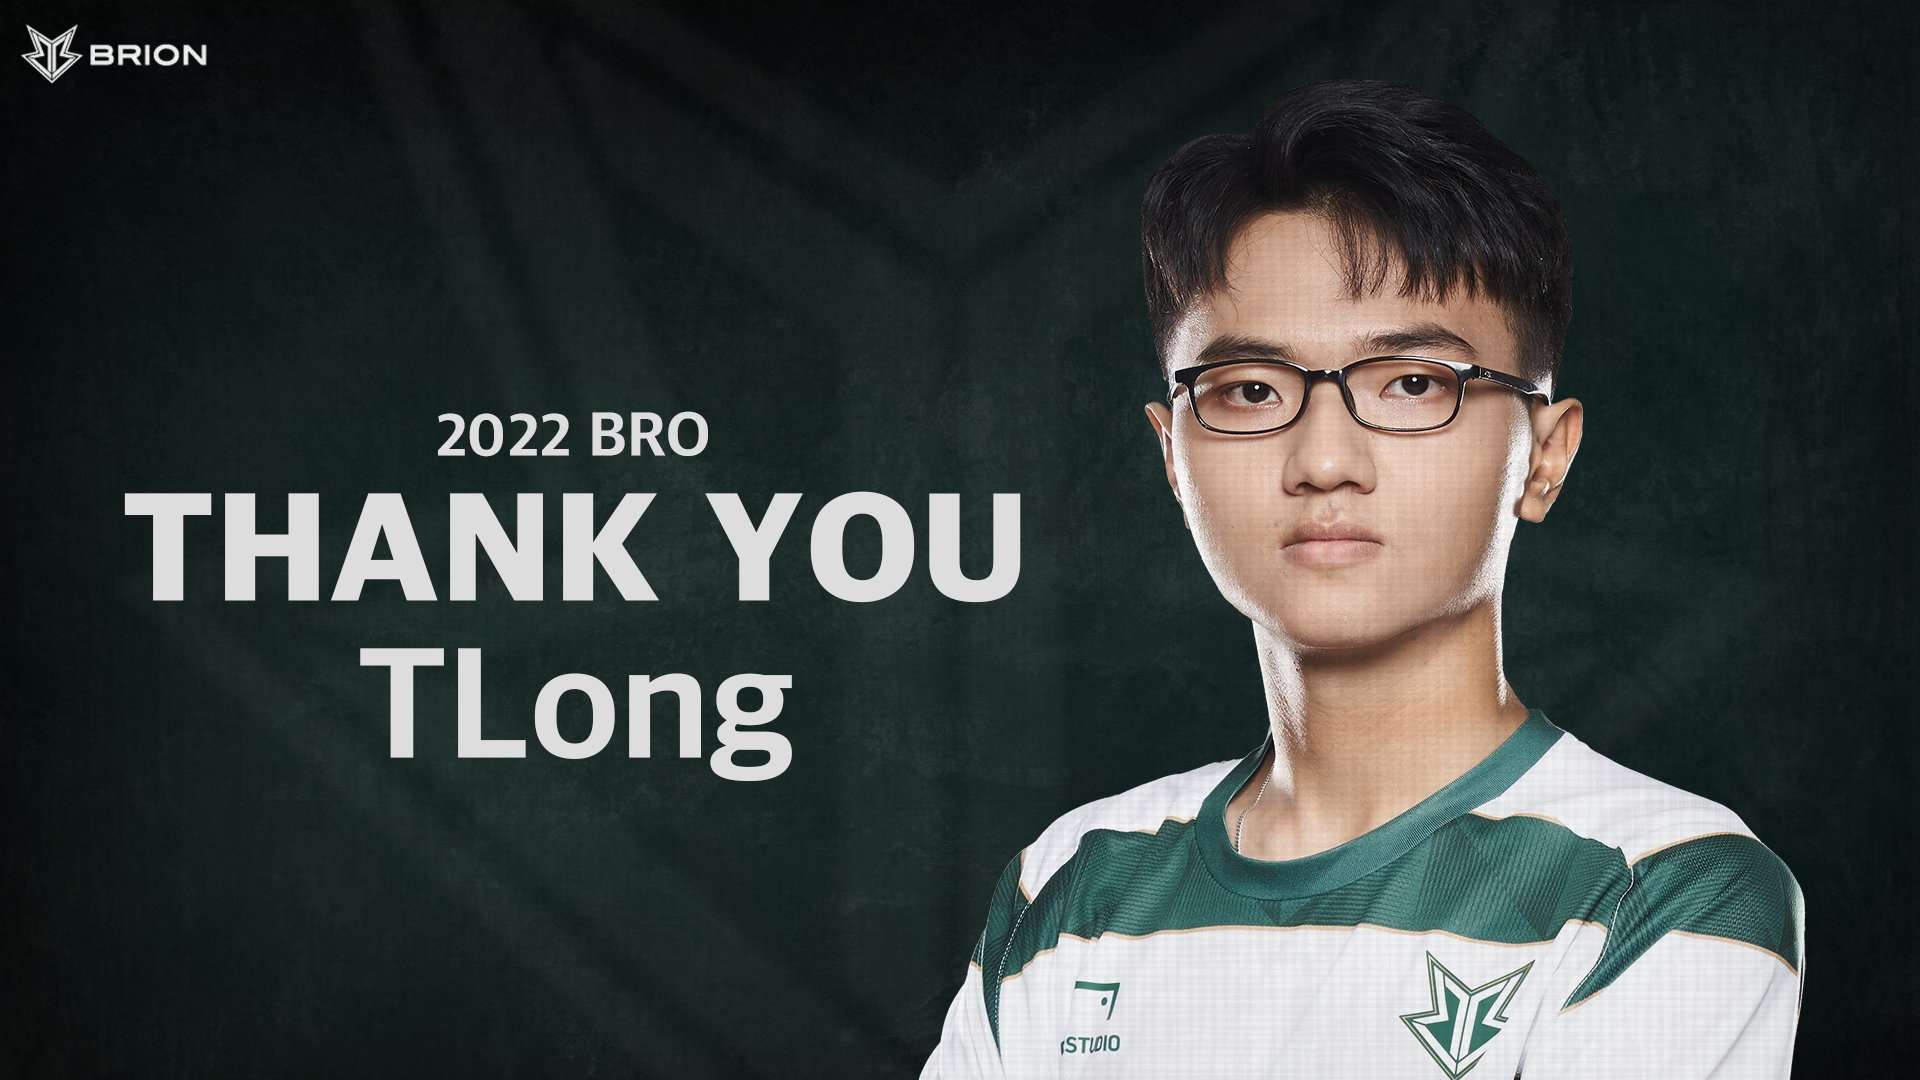 TLong bid farewell to BRION after a year in the LCK CL